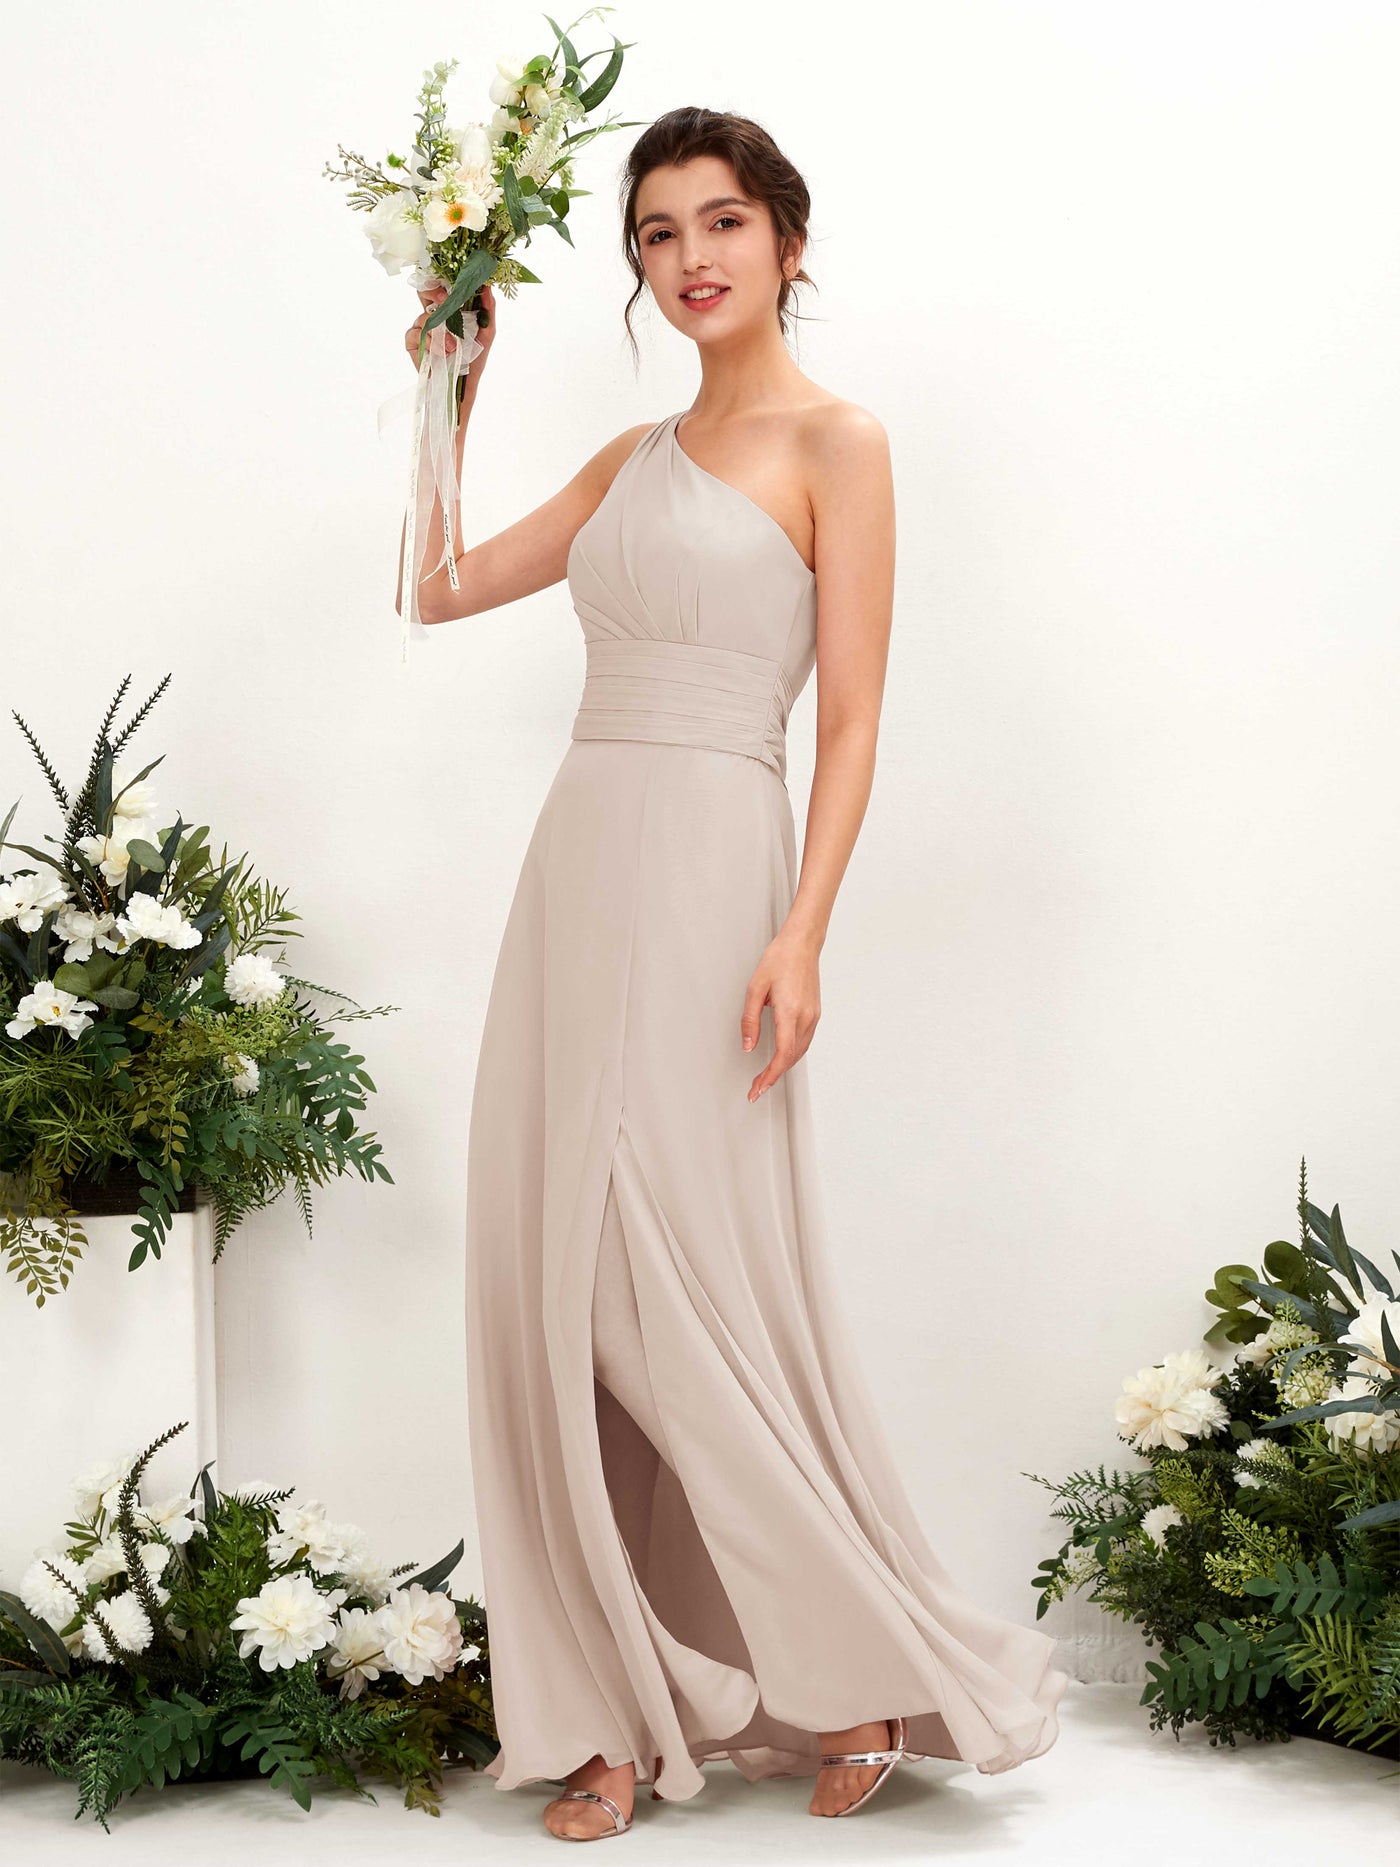 Champagne Bridesmaid Dresses Bridesmaid Dress A-line Chiffon One Shoulder Full Length Sleeveless Wedding Party Dress (81224716)#color_champagne